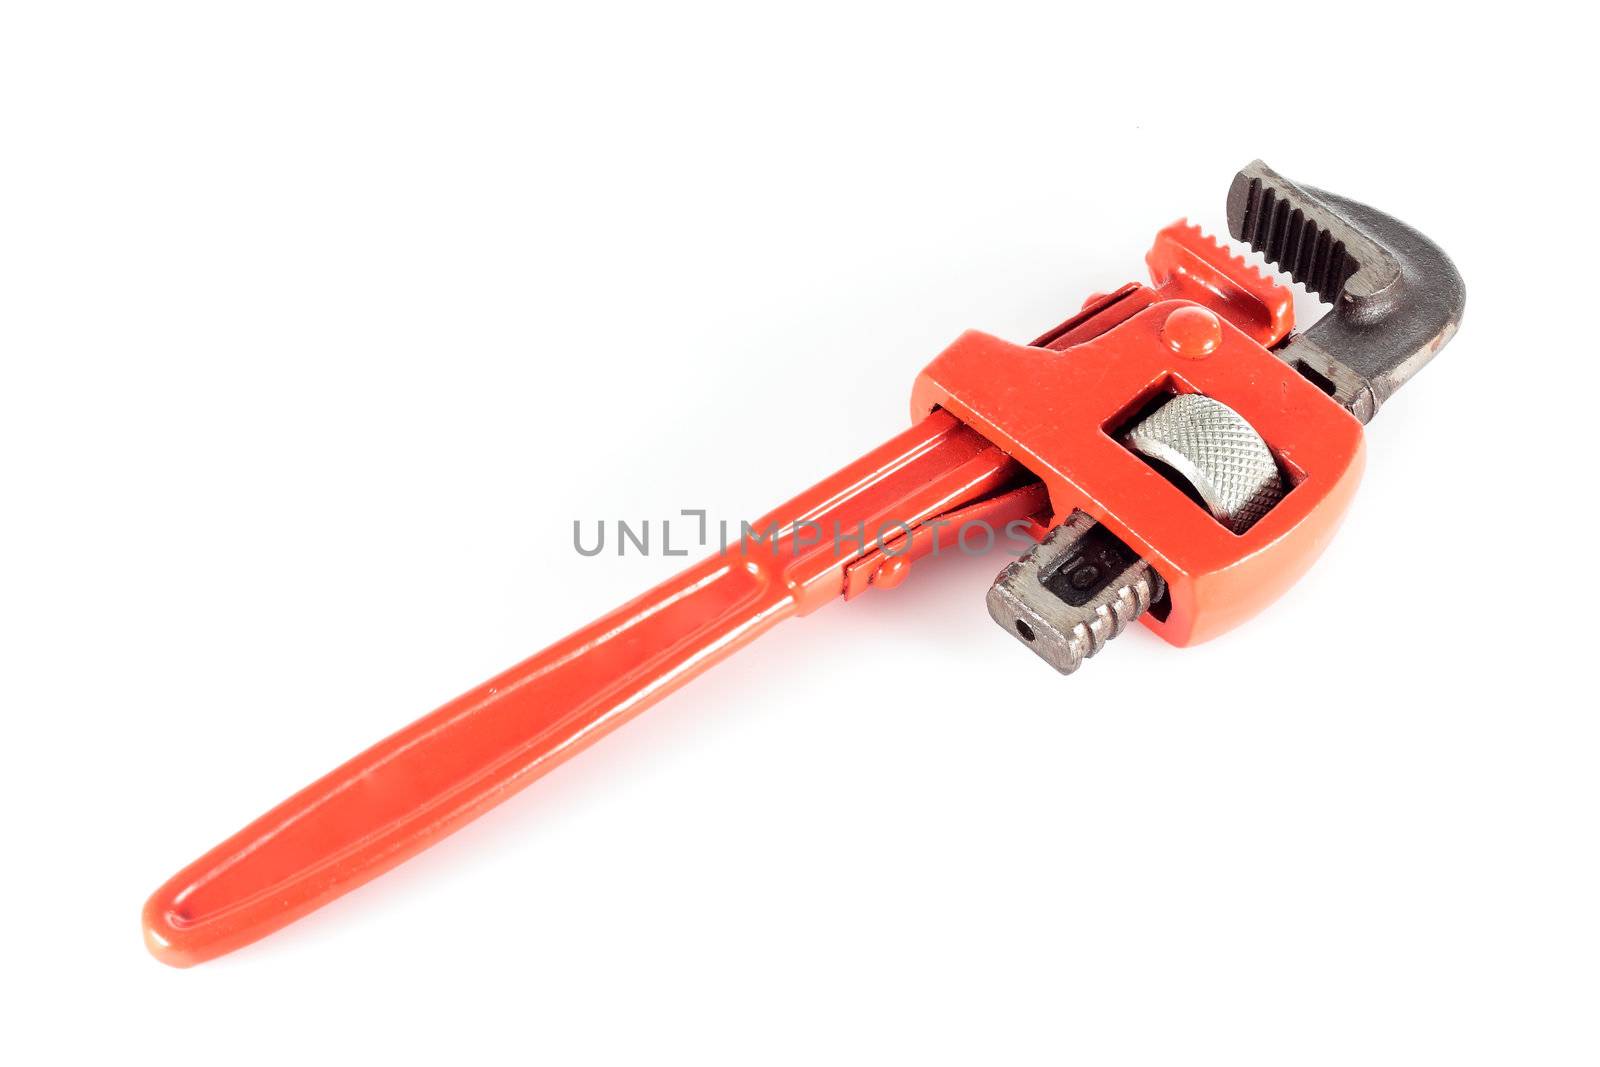 adjustable spanner colored red for plumbing isolated on fund in horizontal